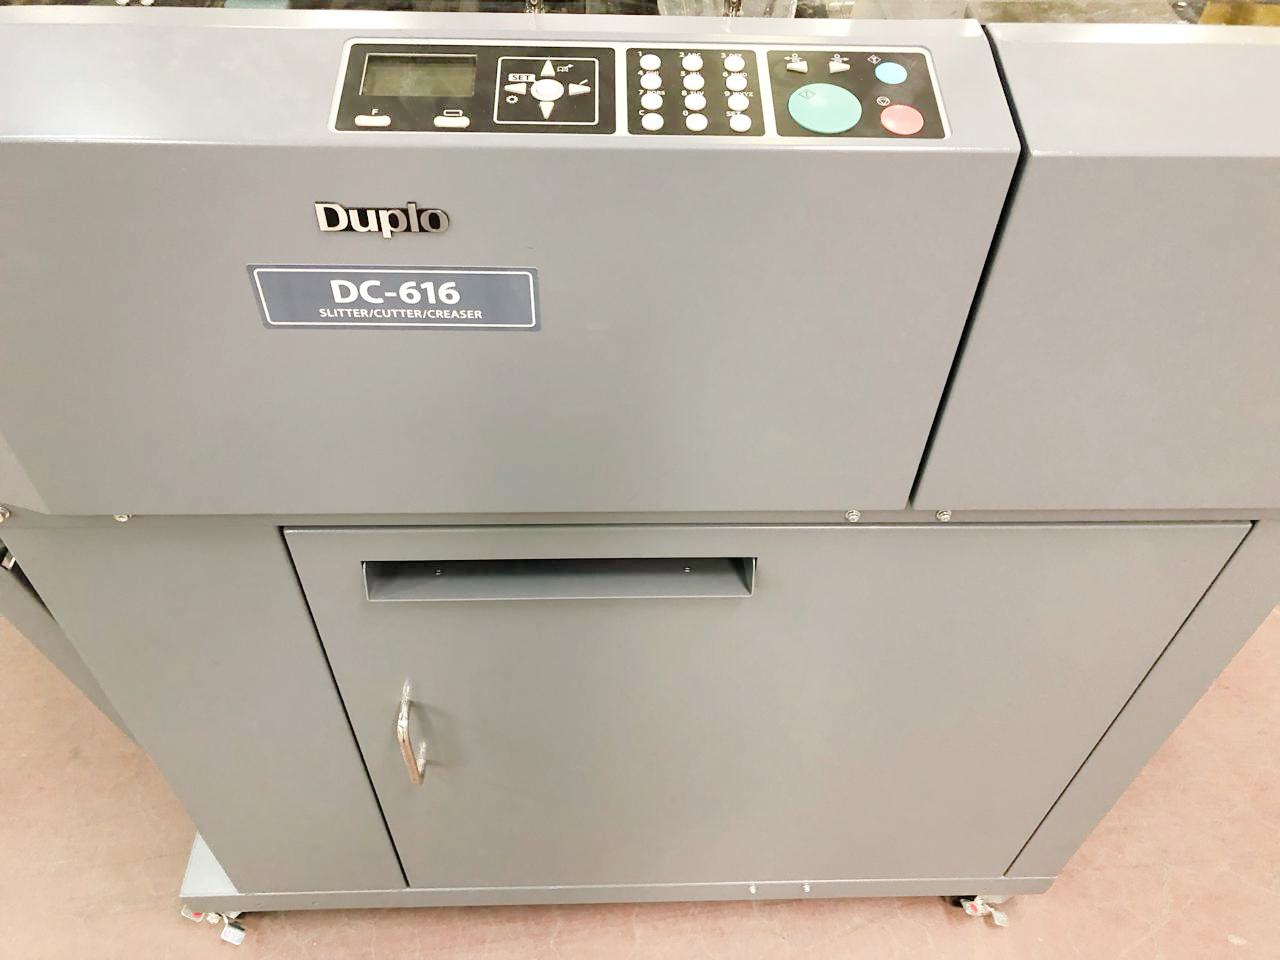 Duplo DC-616 Slitter / Cutter / Creaser (used) Item # UE-032322B (New Jersey)